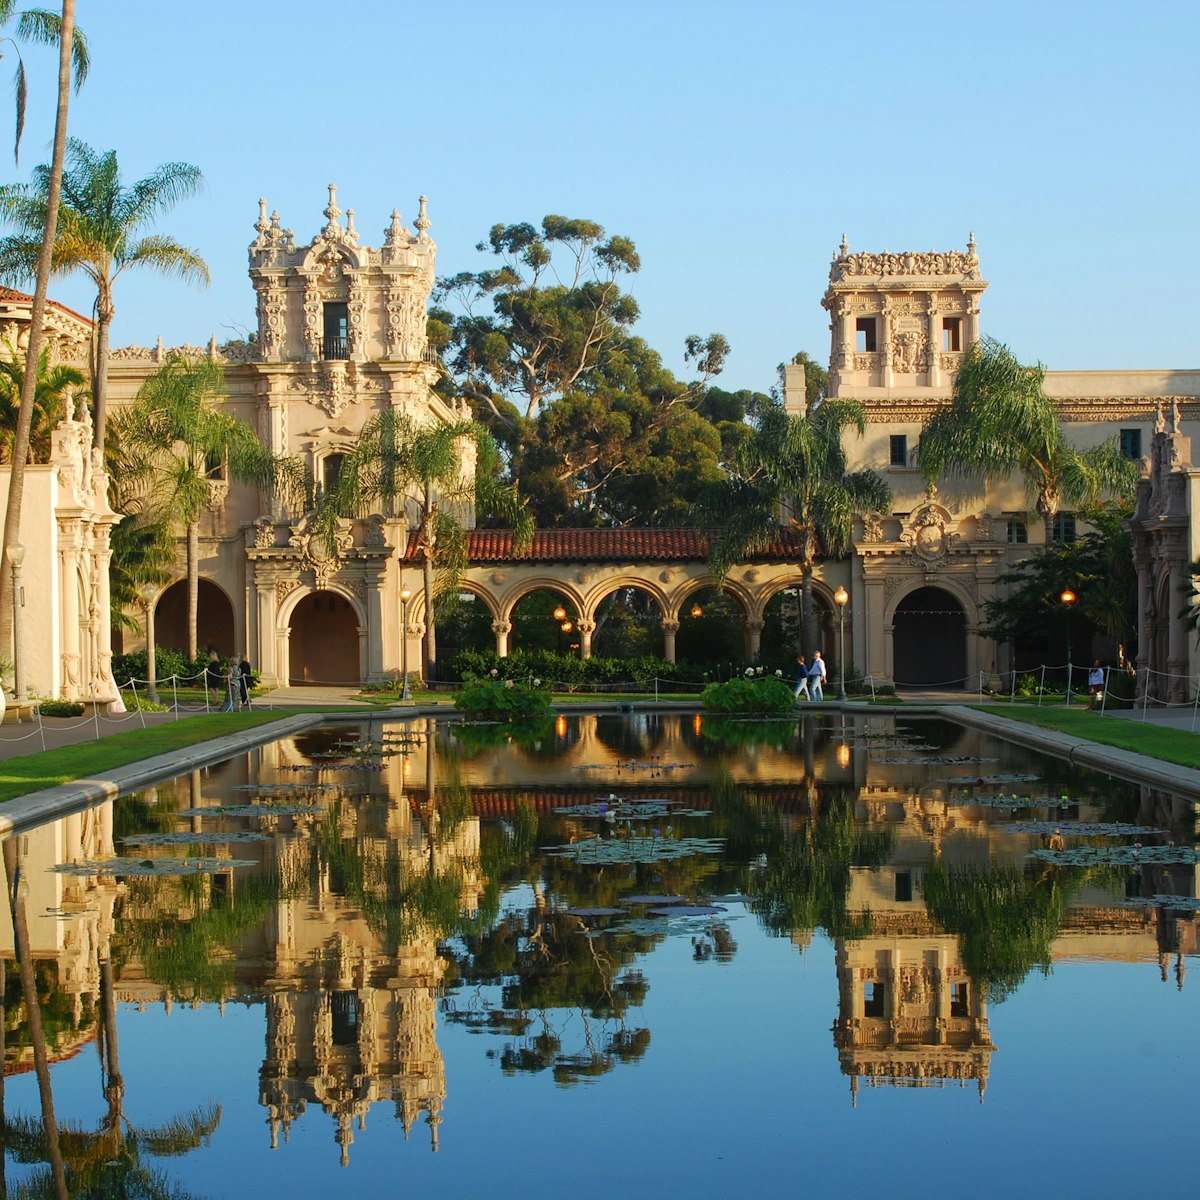 Balboa Park with buildings reflected in still water.